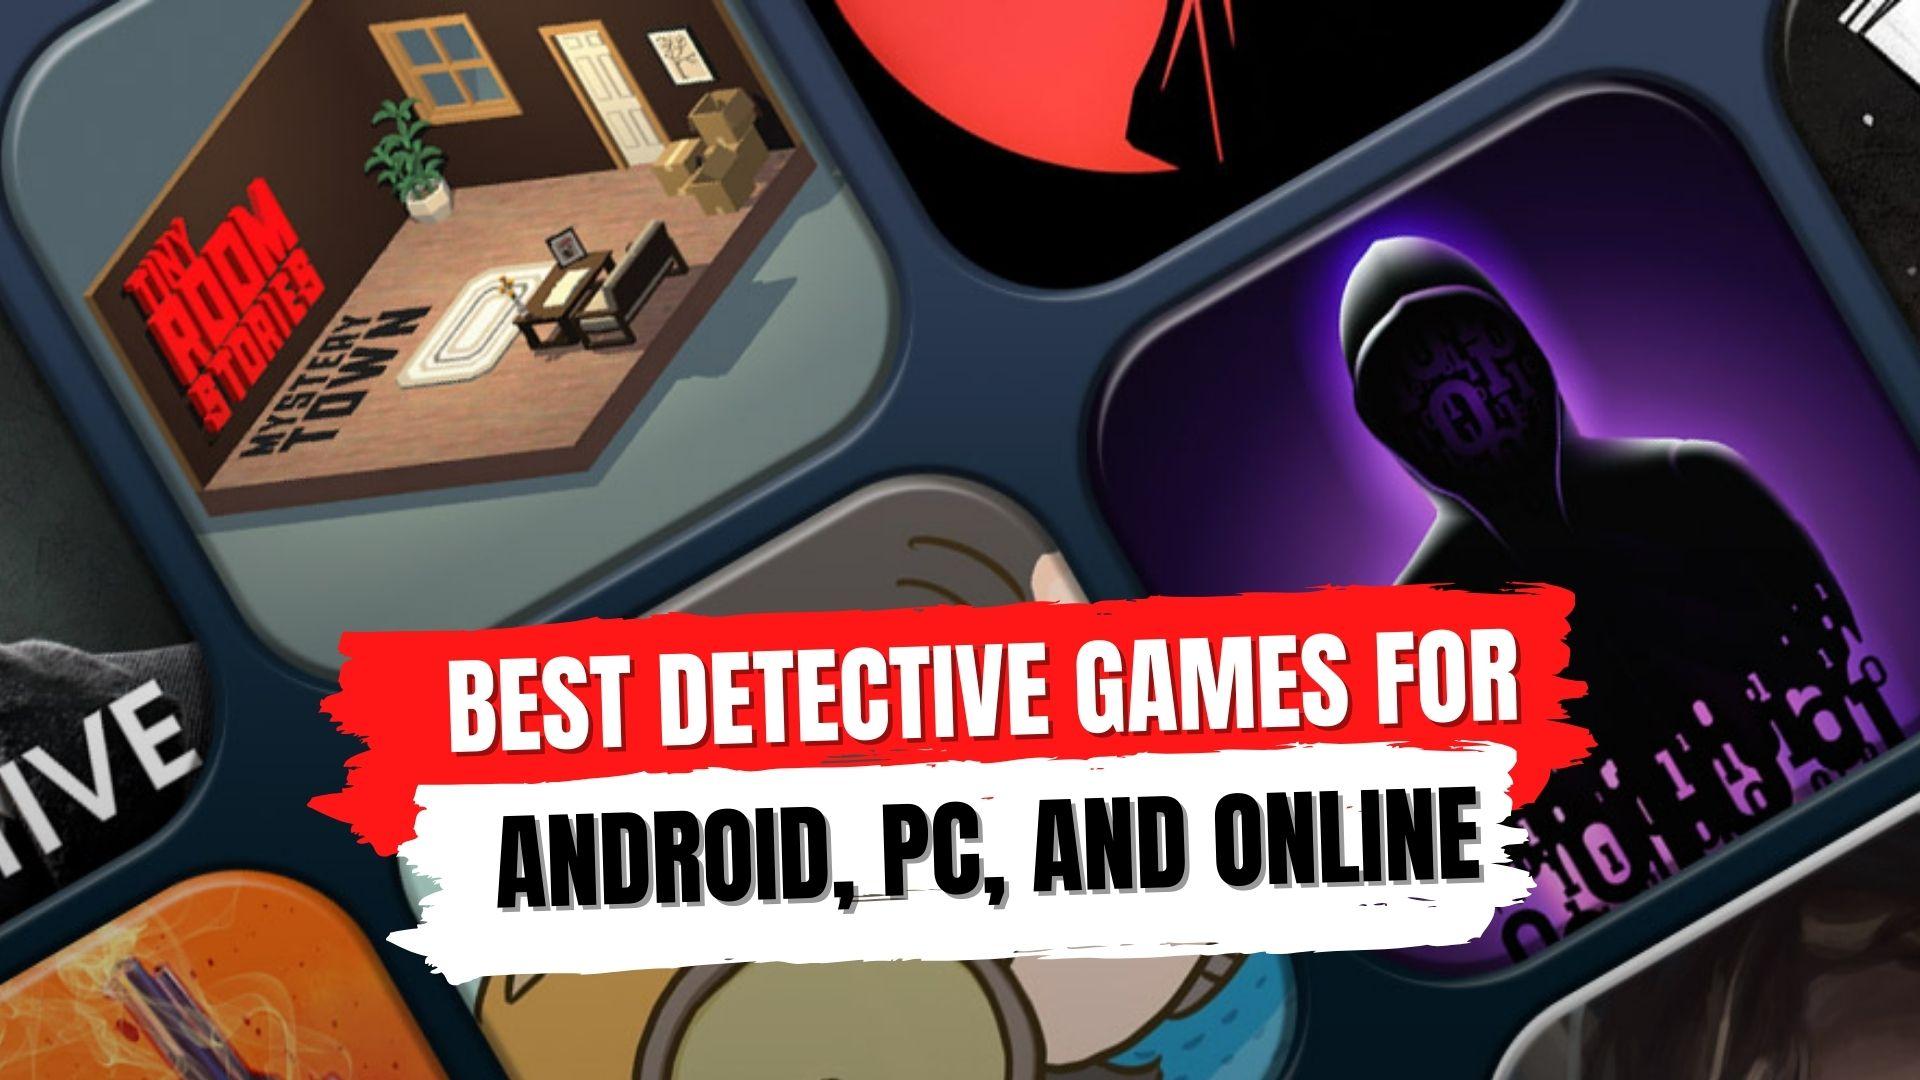 15 Best and Most Popular Online Games for Android